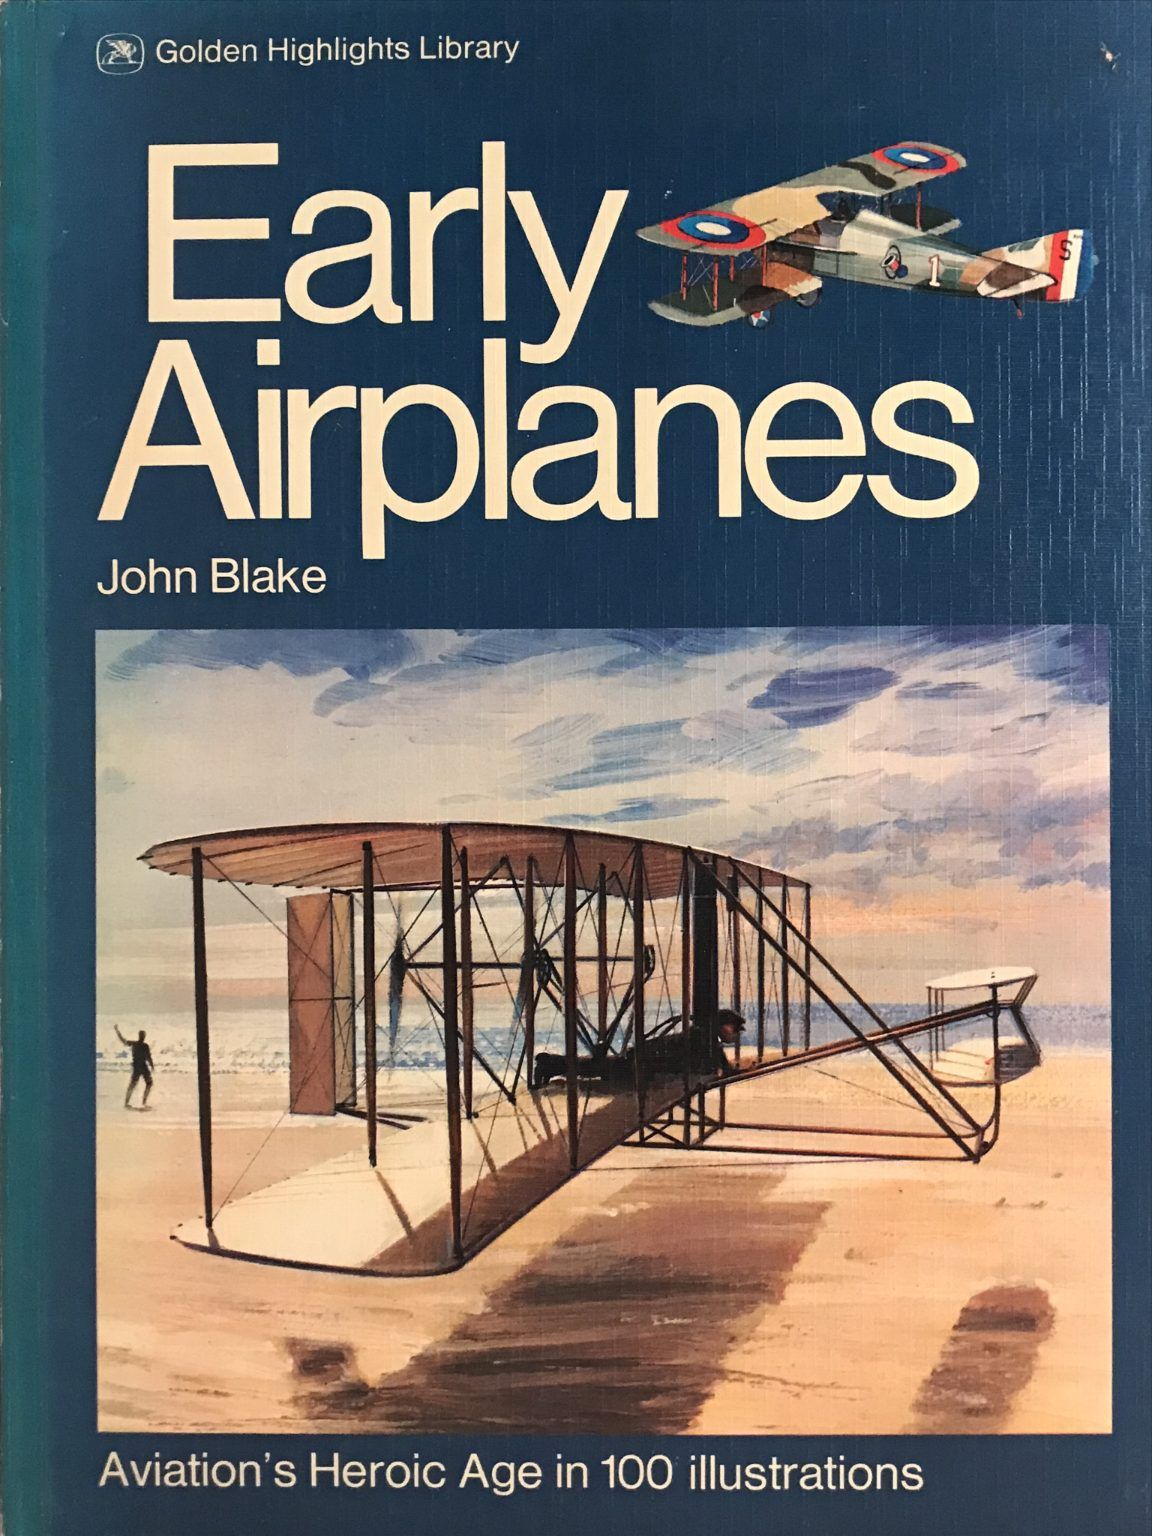 EARLY AIRPLANES: Aviation's Heroic Age In 100 Illustrations